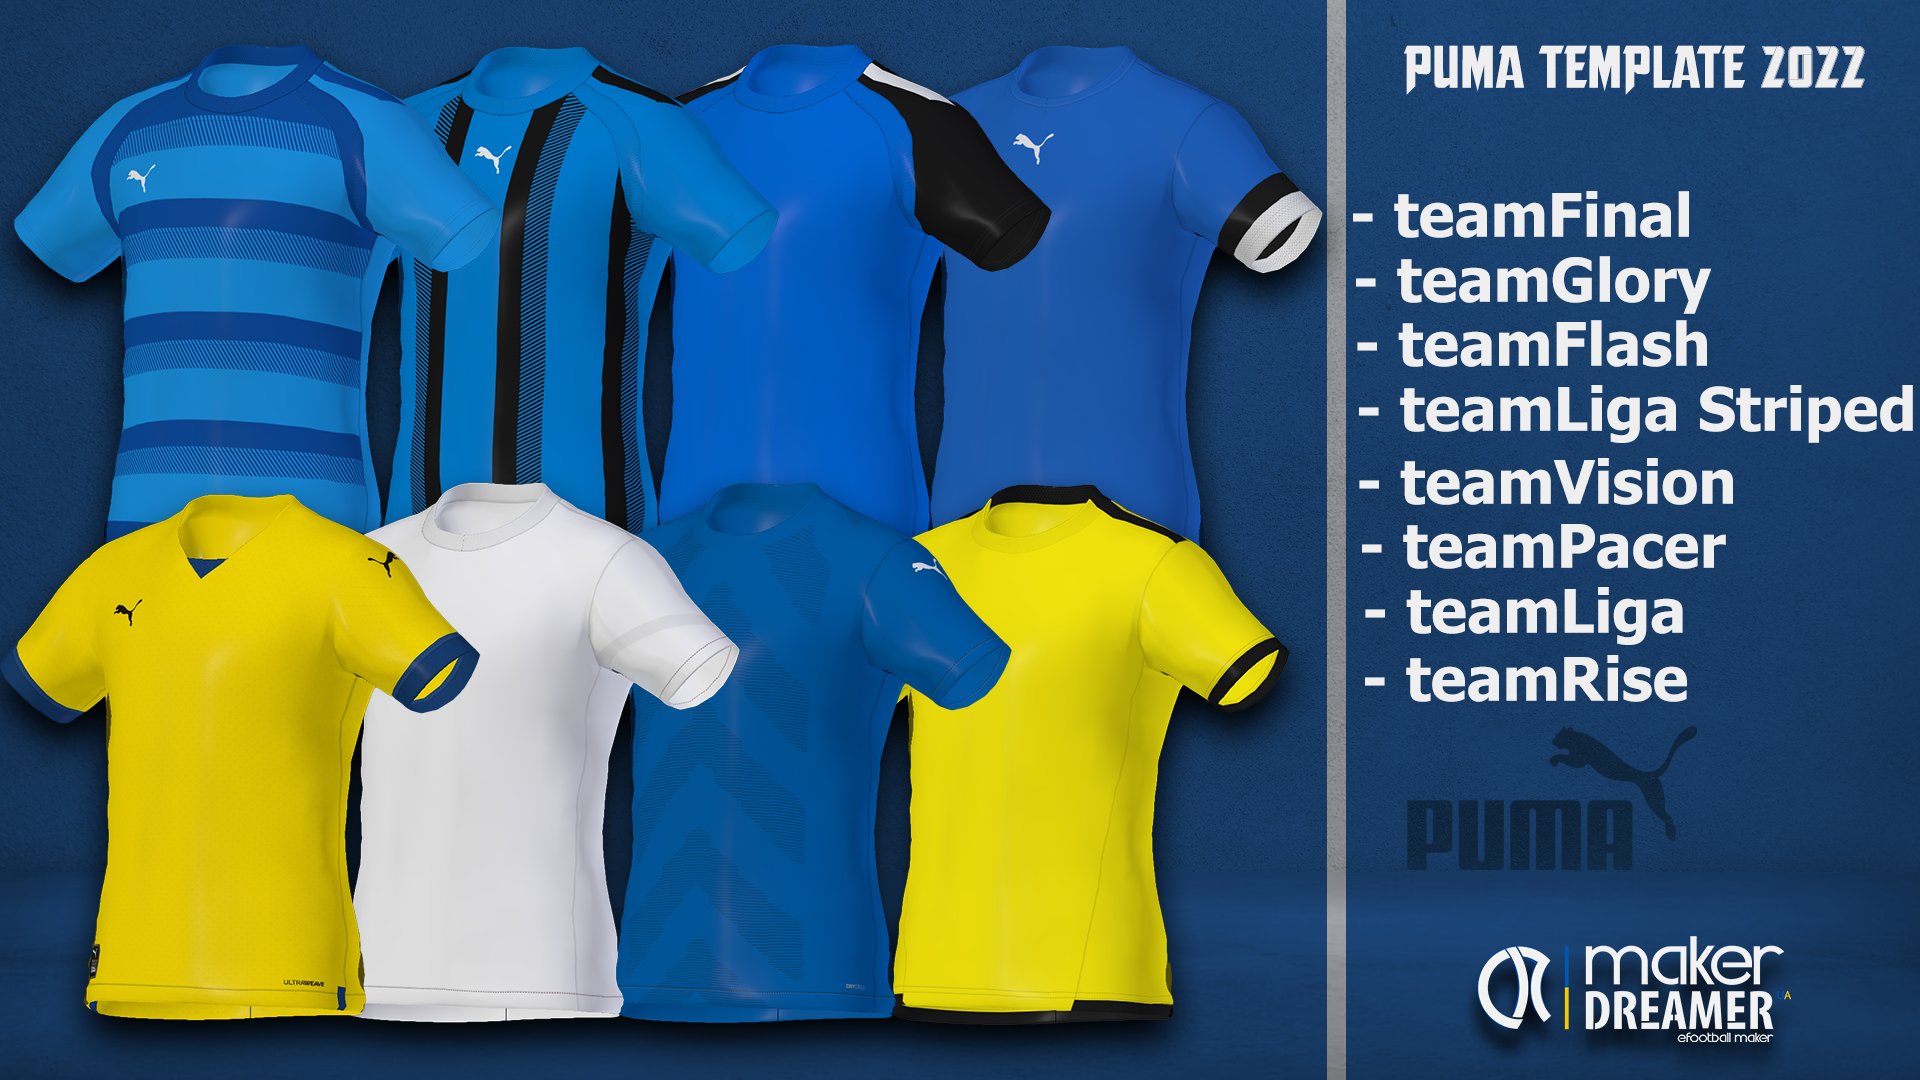 Planta de semillero Arancel Cuadrante eFootball Maker_DREAMER on Twitter: "Puma Templates 2022 by makerDreamer  You can buy templates from me, I also make custom forms! PayPal:  ivan.ironbets100@gmail.com #pumateamwear #puma #efootball2022 #makerdreamer  #kitmakerdreamer #kitmaker #dreamer ...